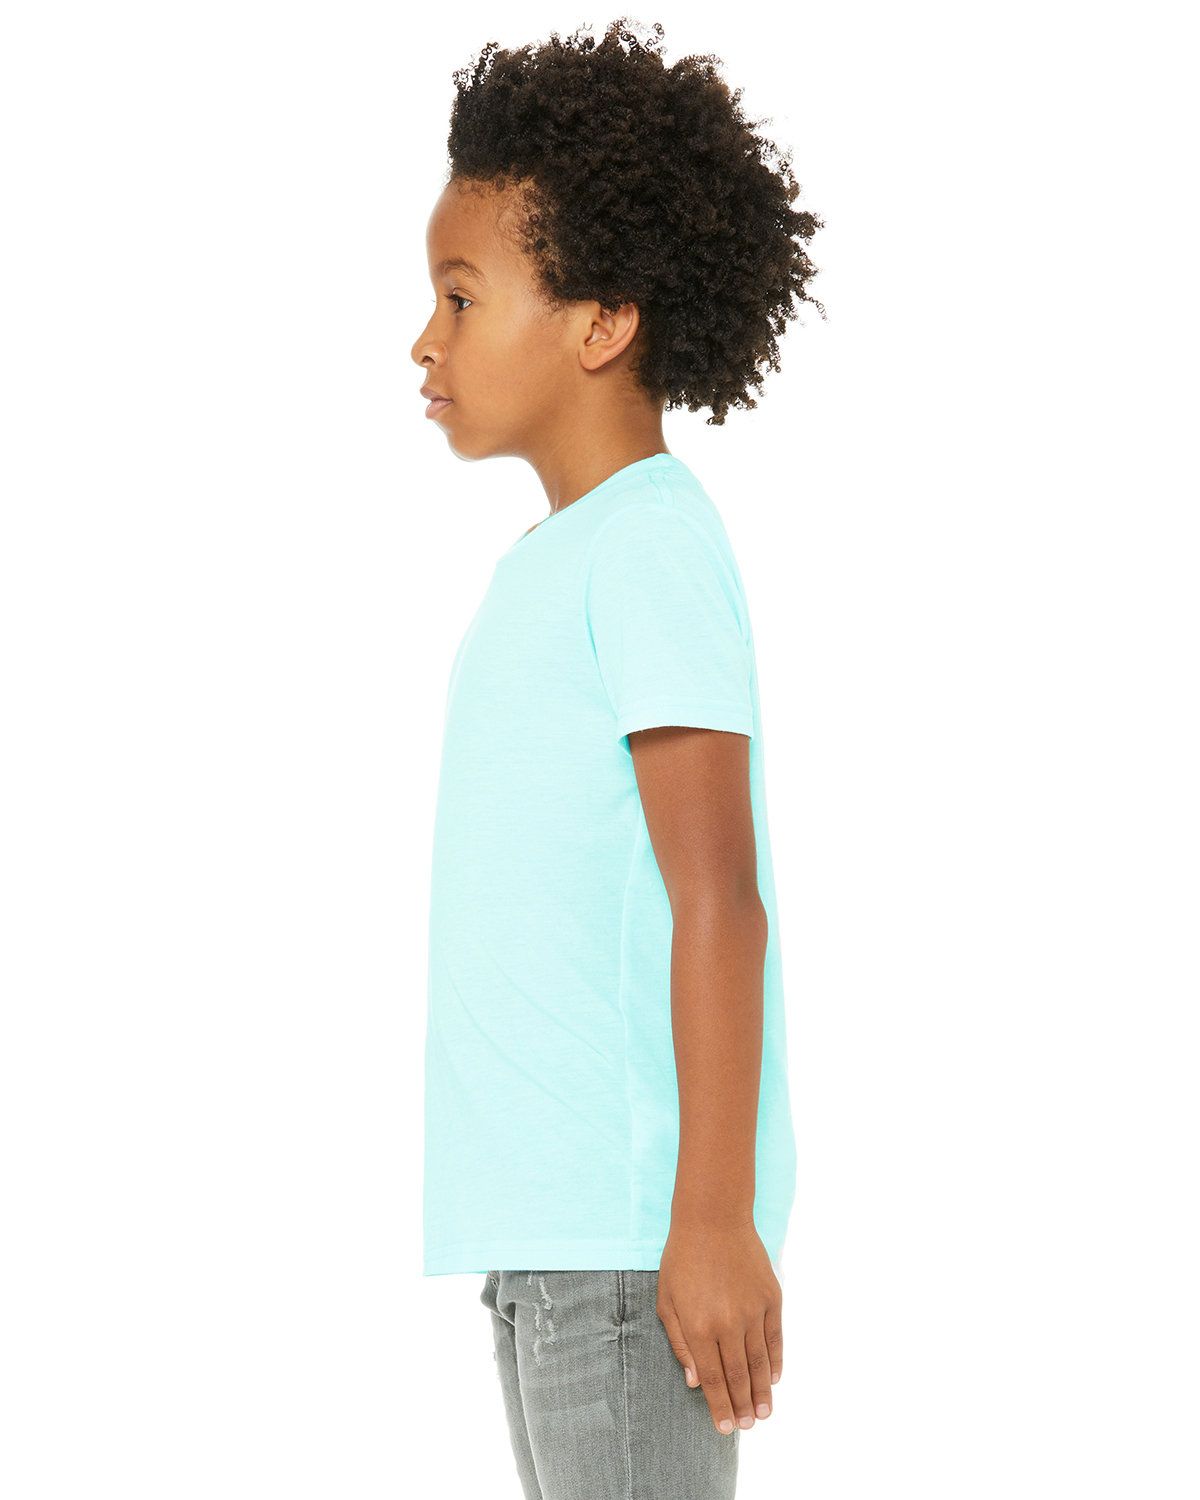 'Bella Canvas 3413Y Youth Triblend Jersey Short Sleeve Tee'